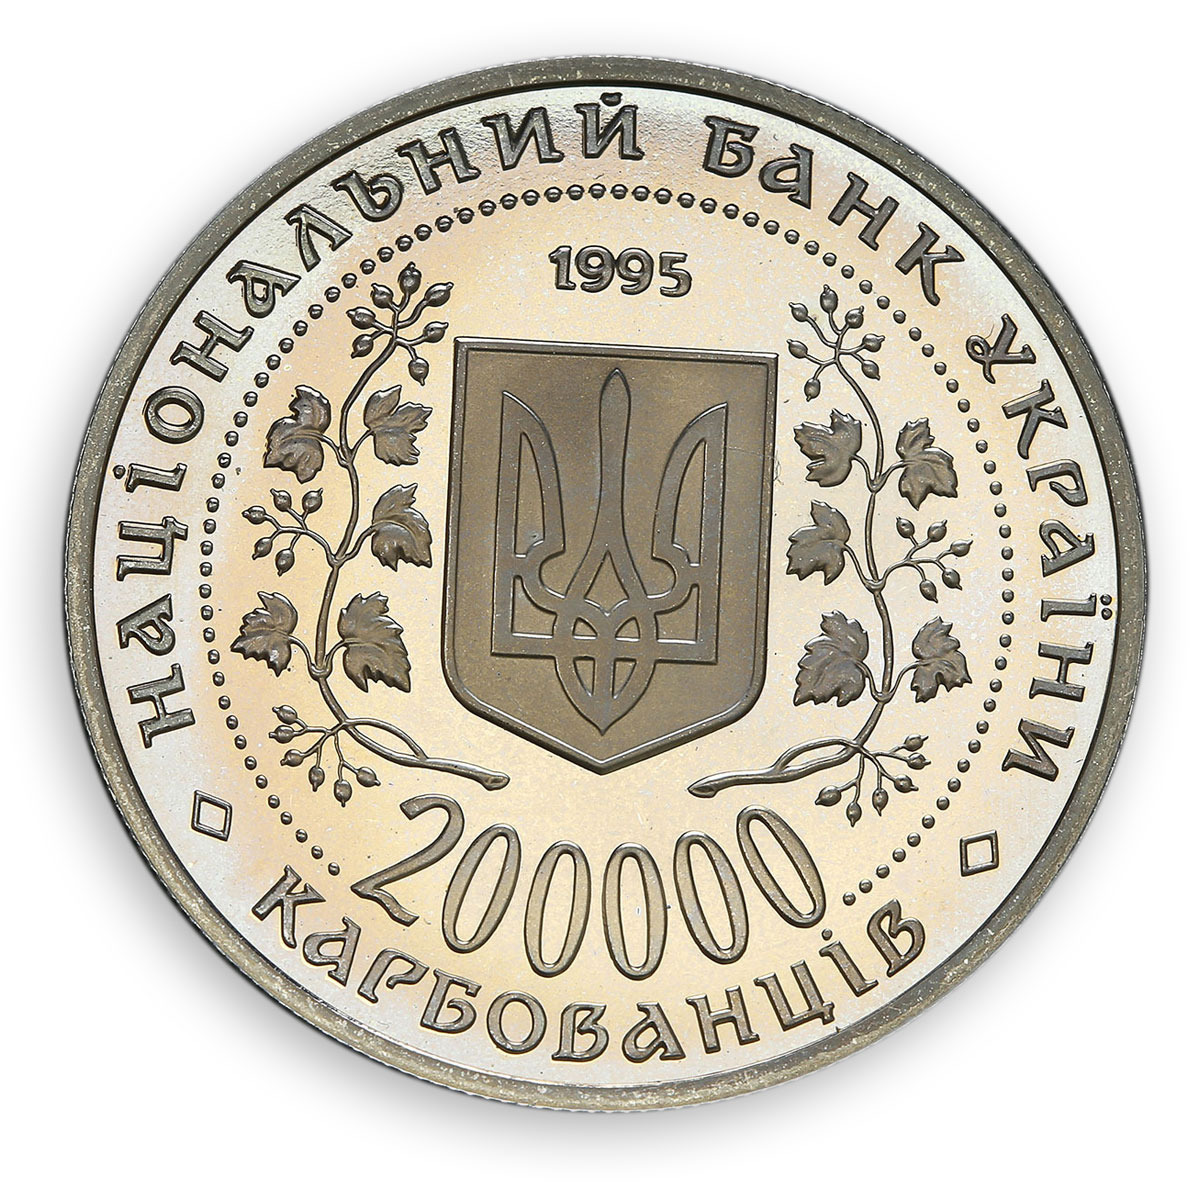 Ukraine 50th anniversary of Victory in the Great Patriotic War, 1995